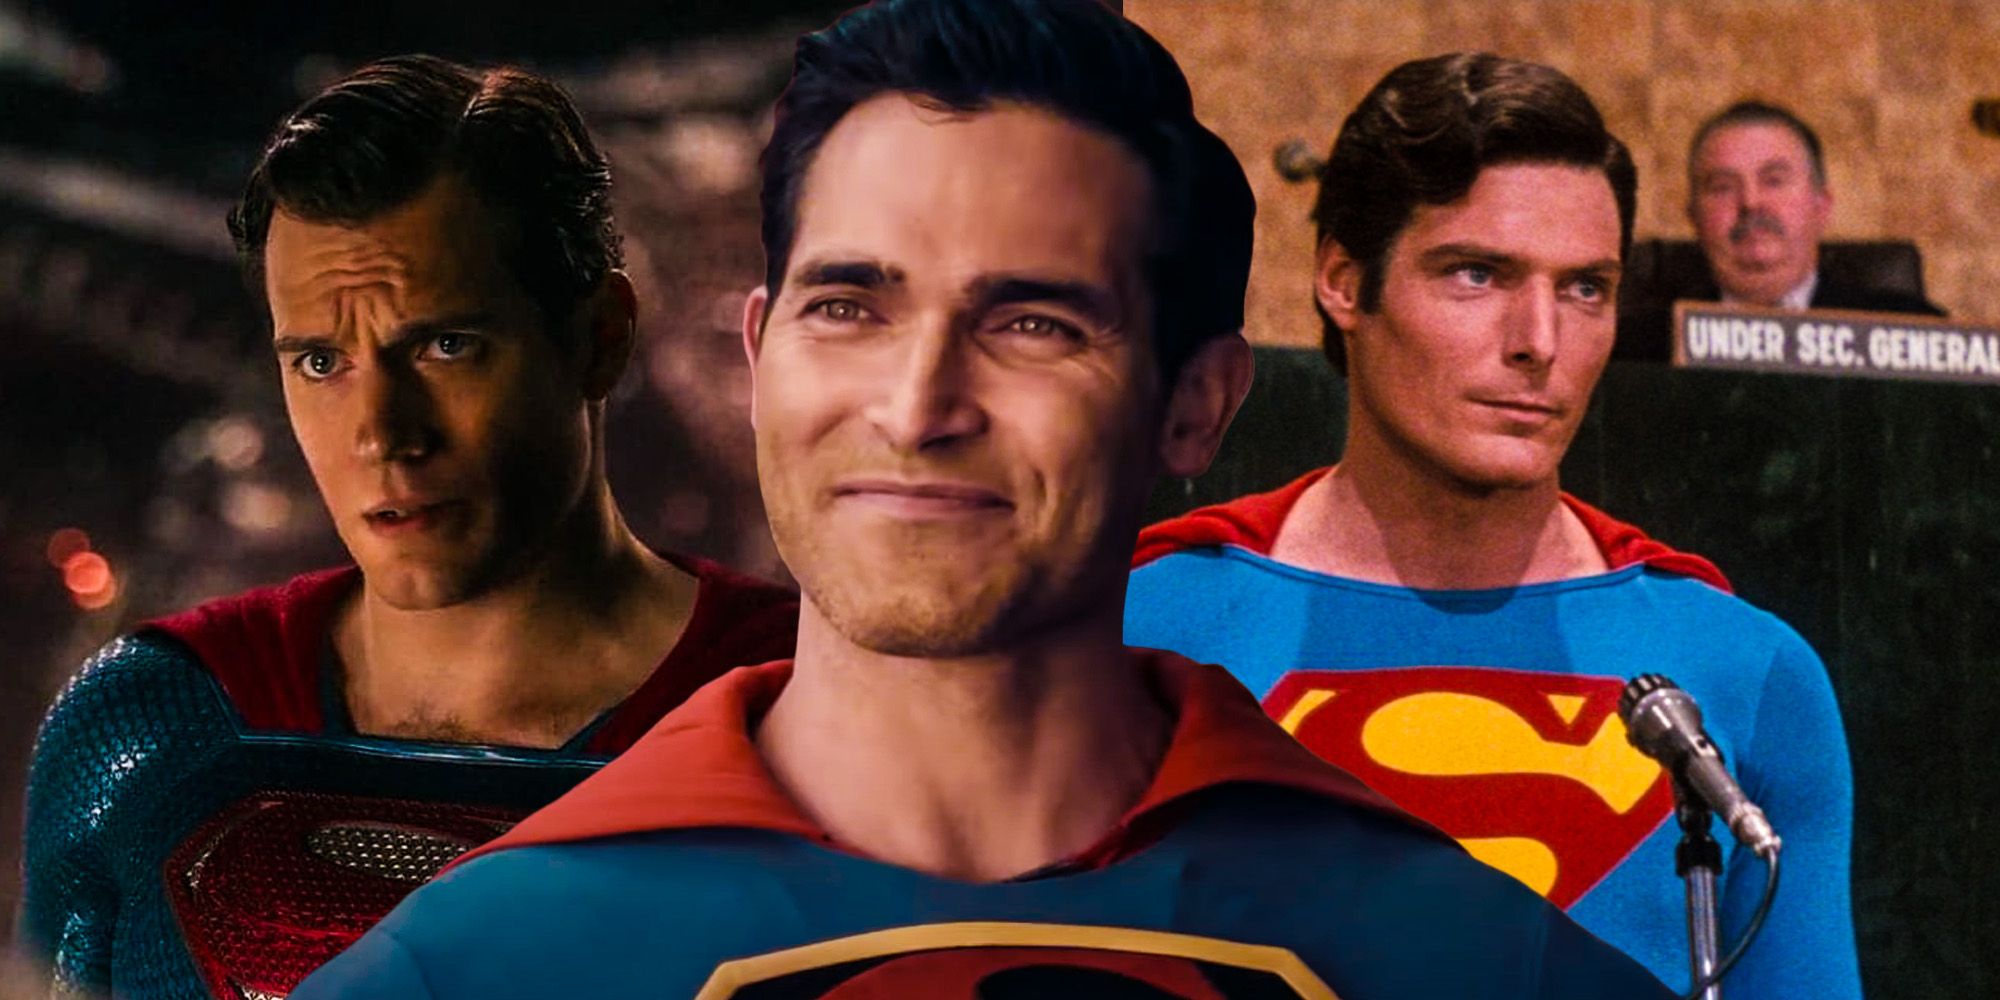 Superman and lois tyler Hoechlin Henry cavill Superman Justice league Christopher Reeves